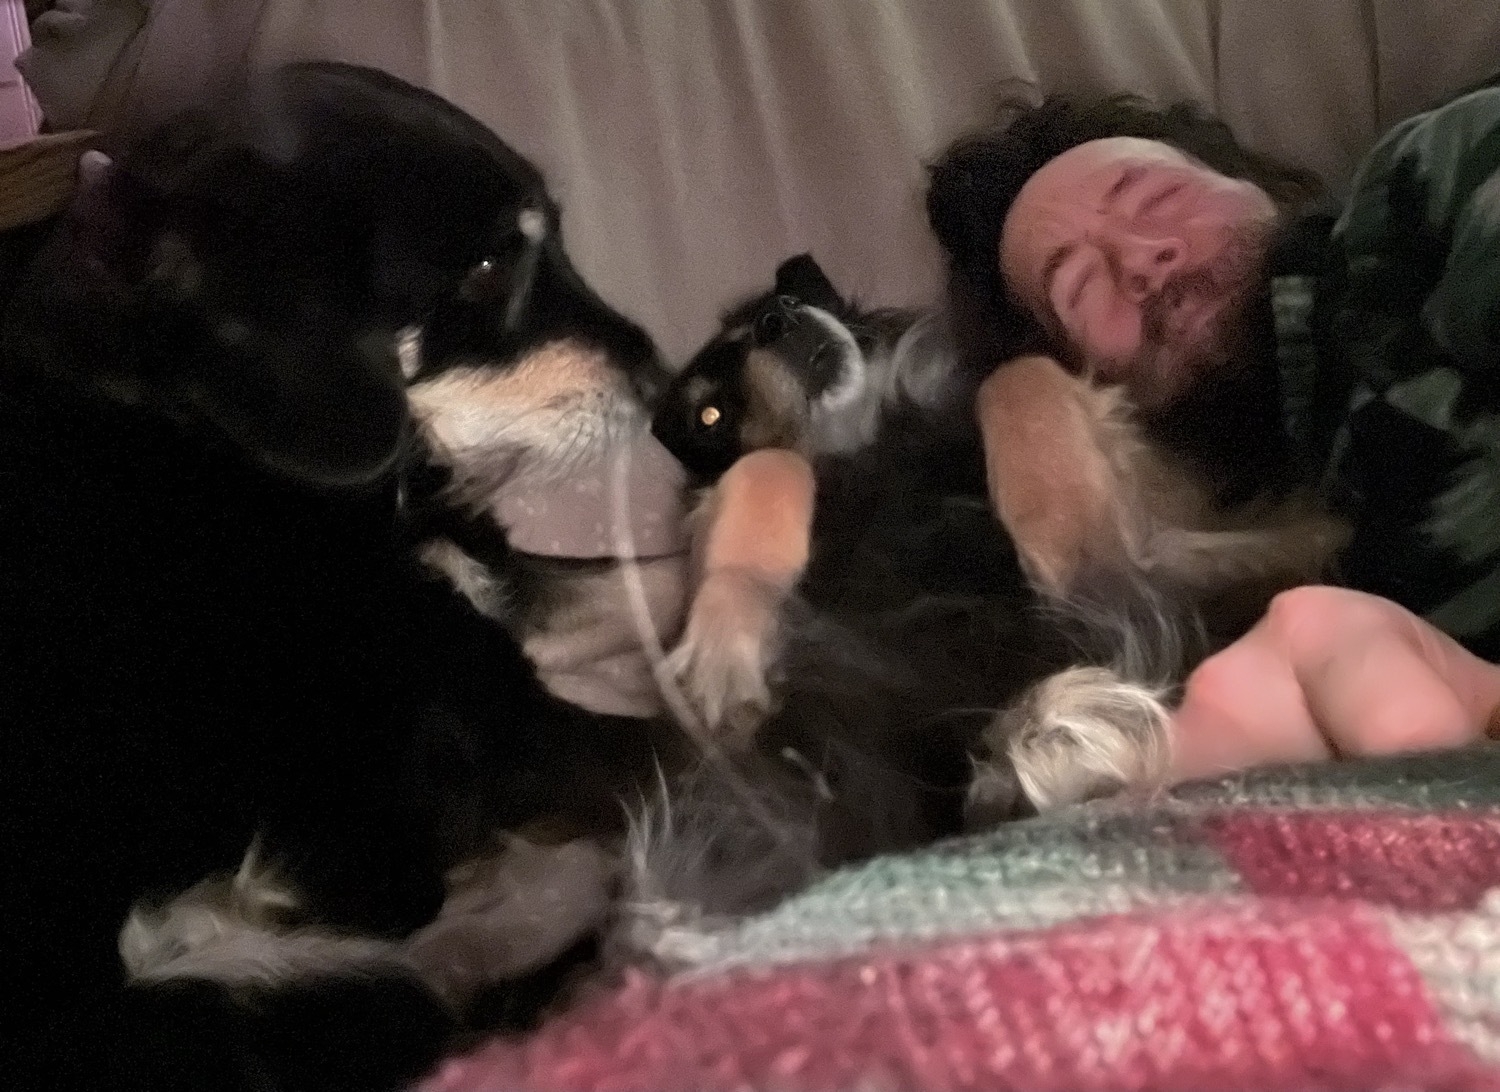 Two black dogs and a person trying to sleep